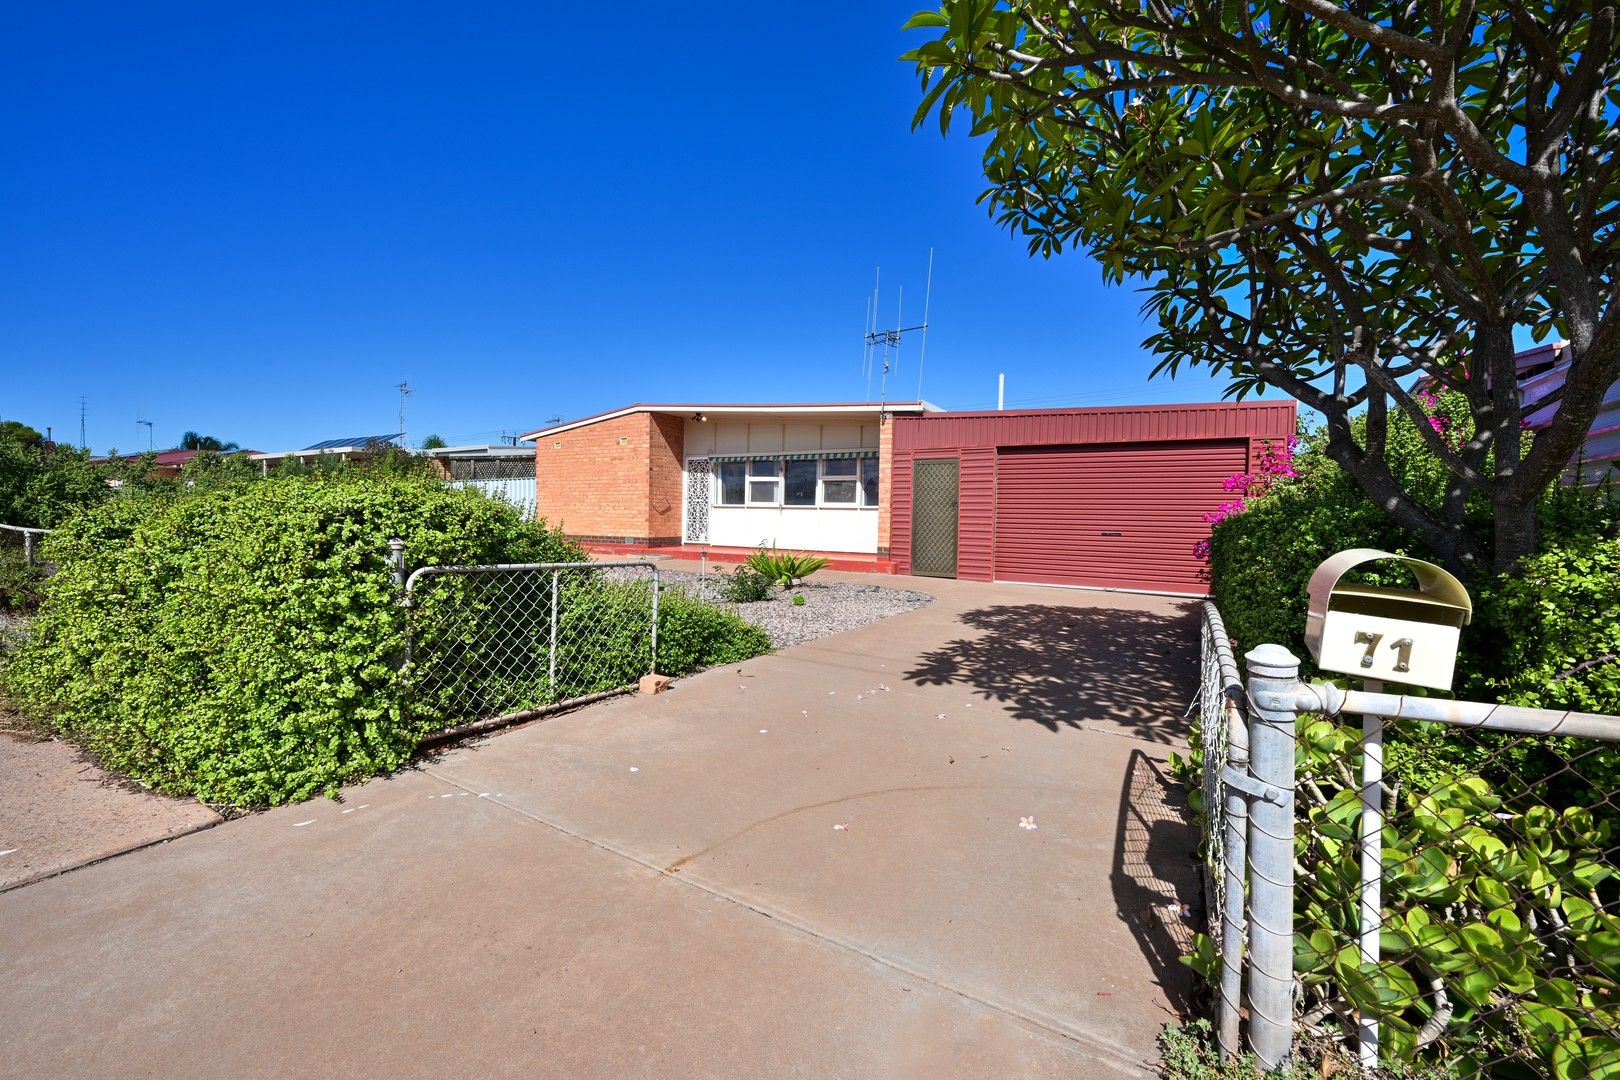 71 Viscount Slim Avenue, Whyalla Norrie SA 5608, Image 0